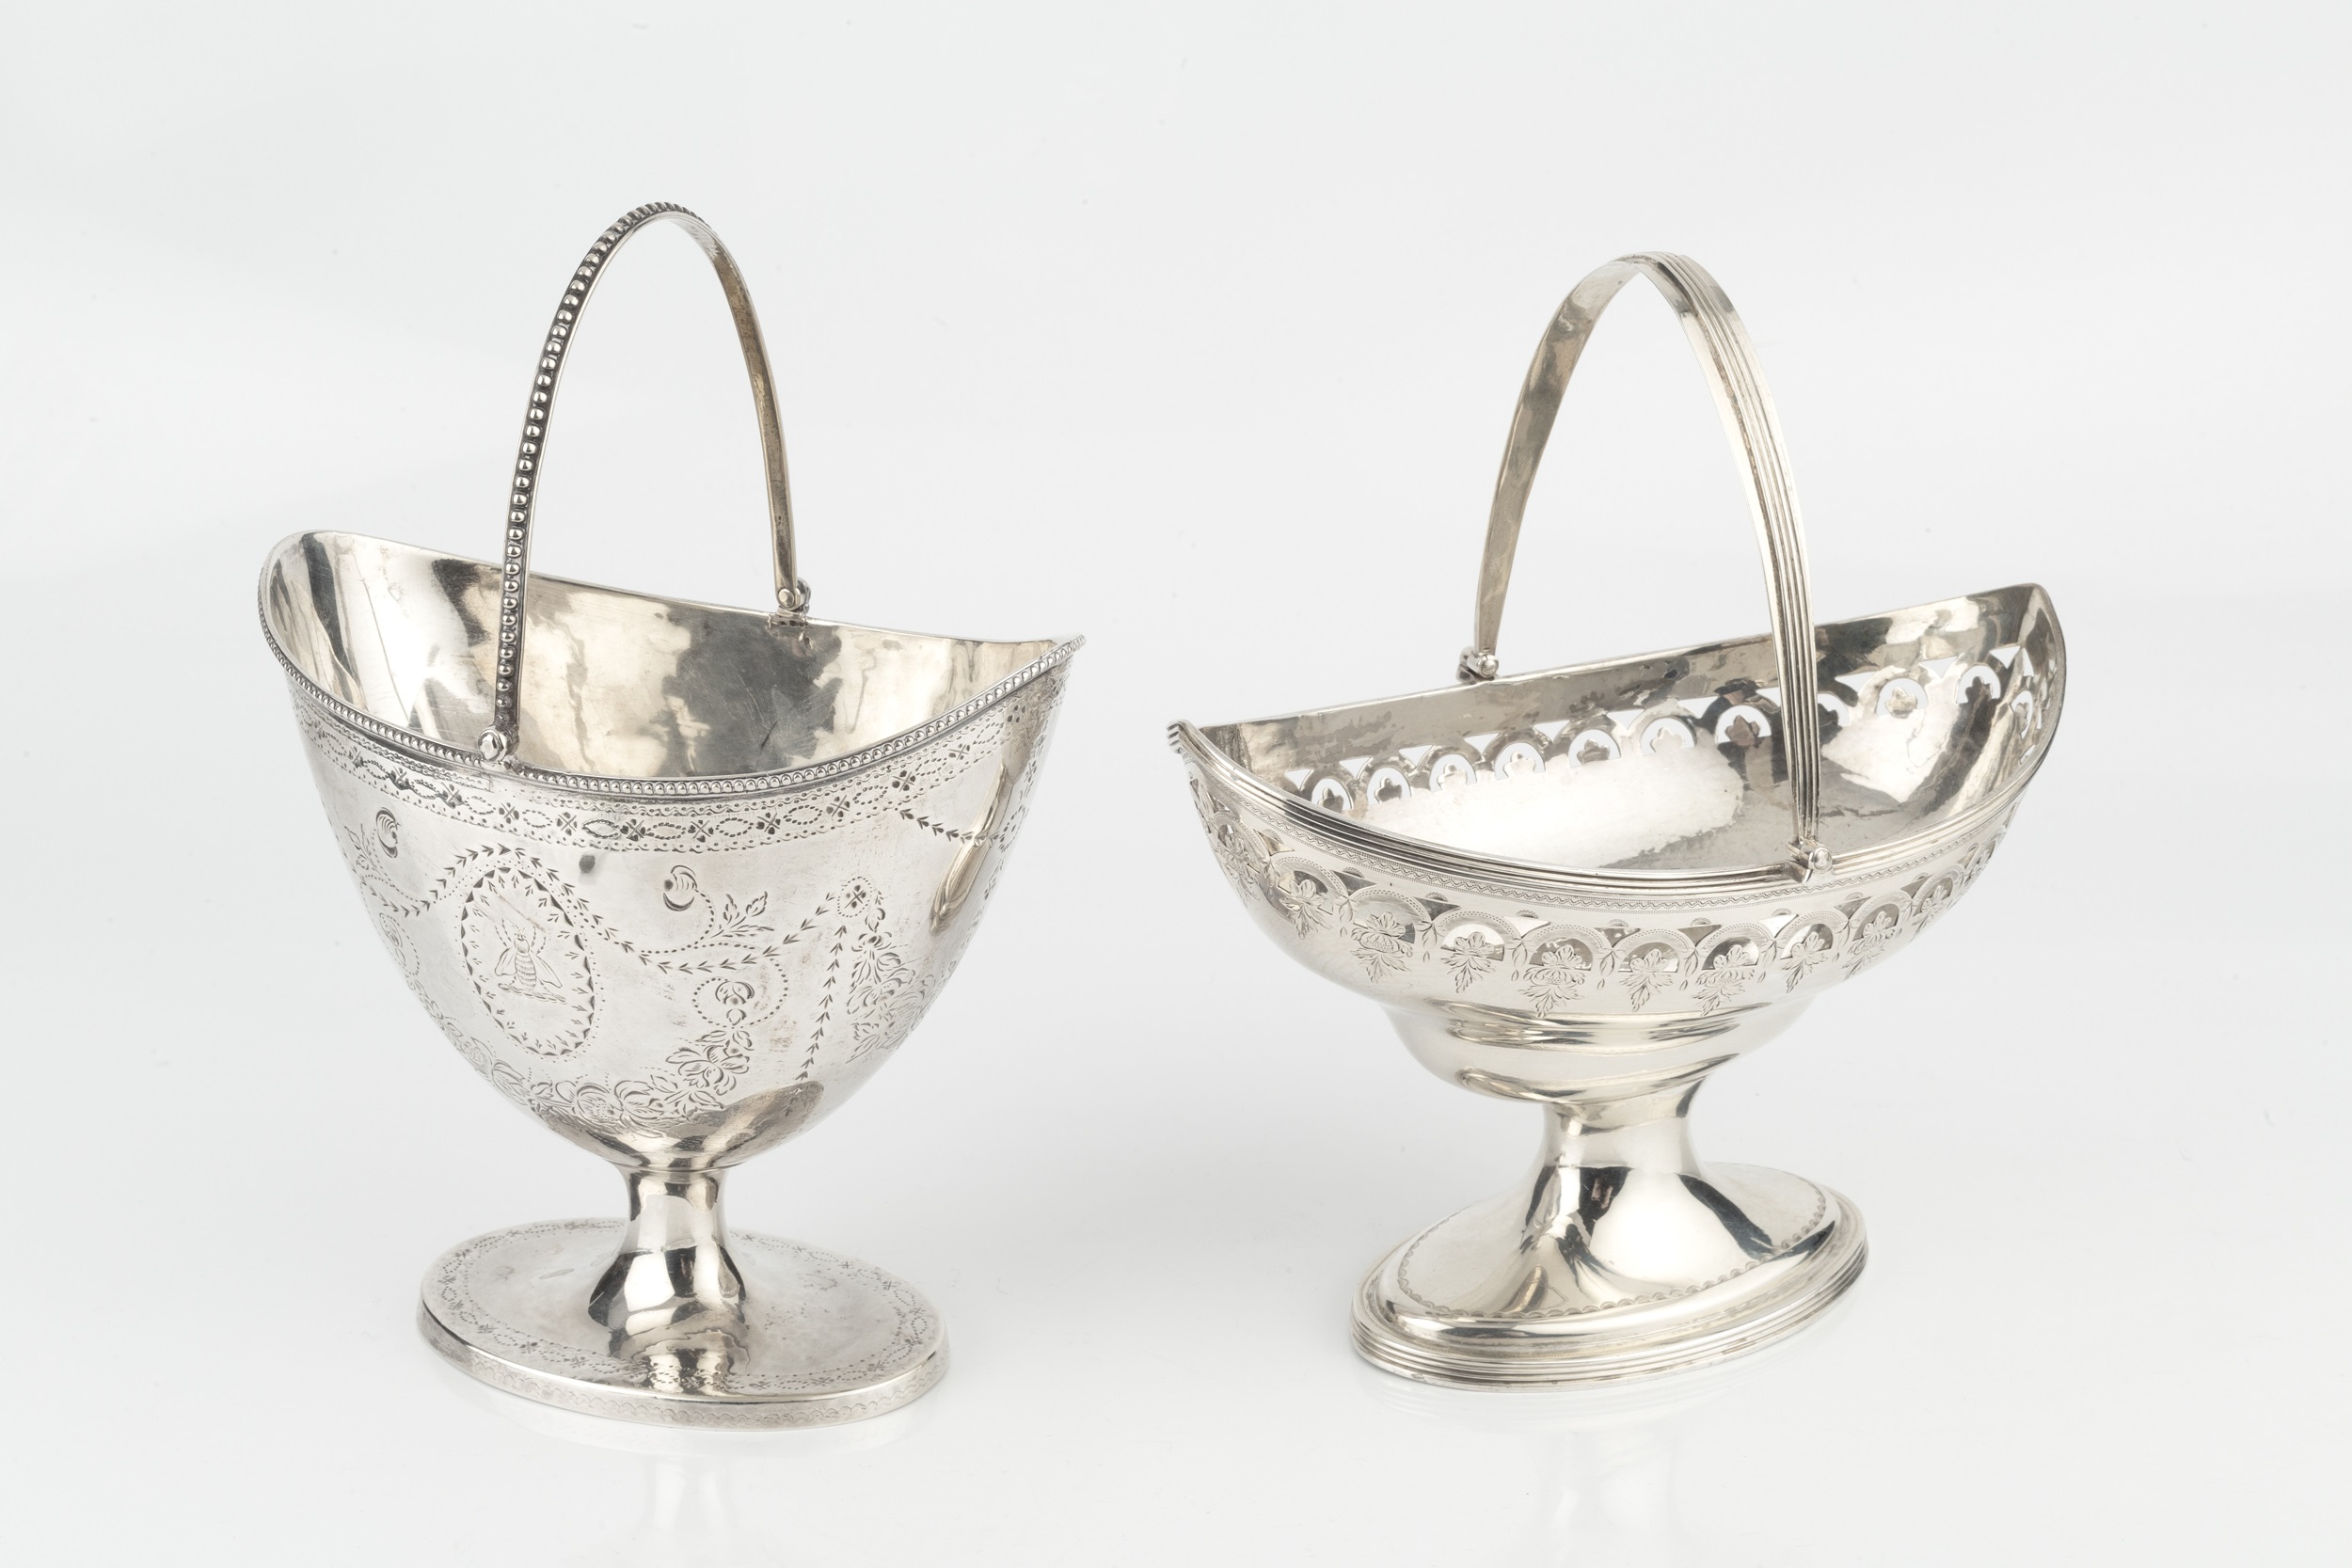 A George III silver swing handled sugar basket, with beaded border and handle, and bright-cut - Image 3 of 3